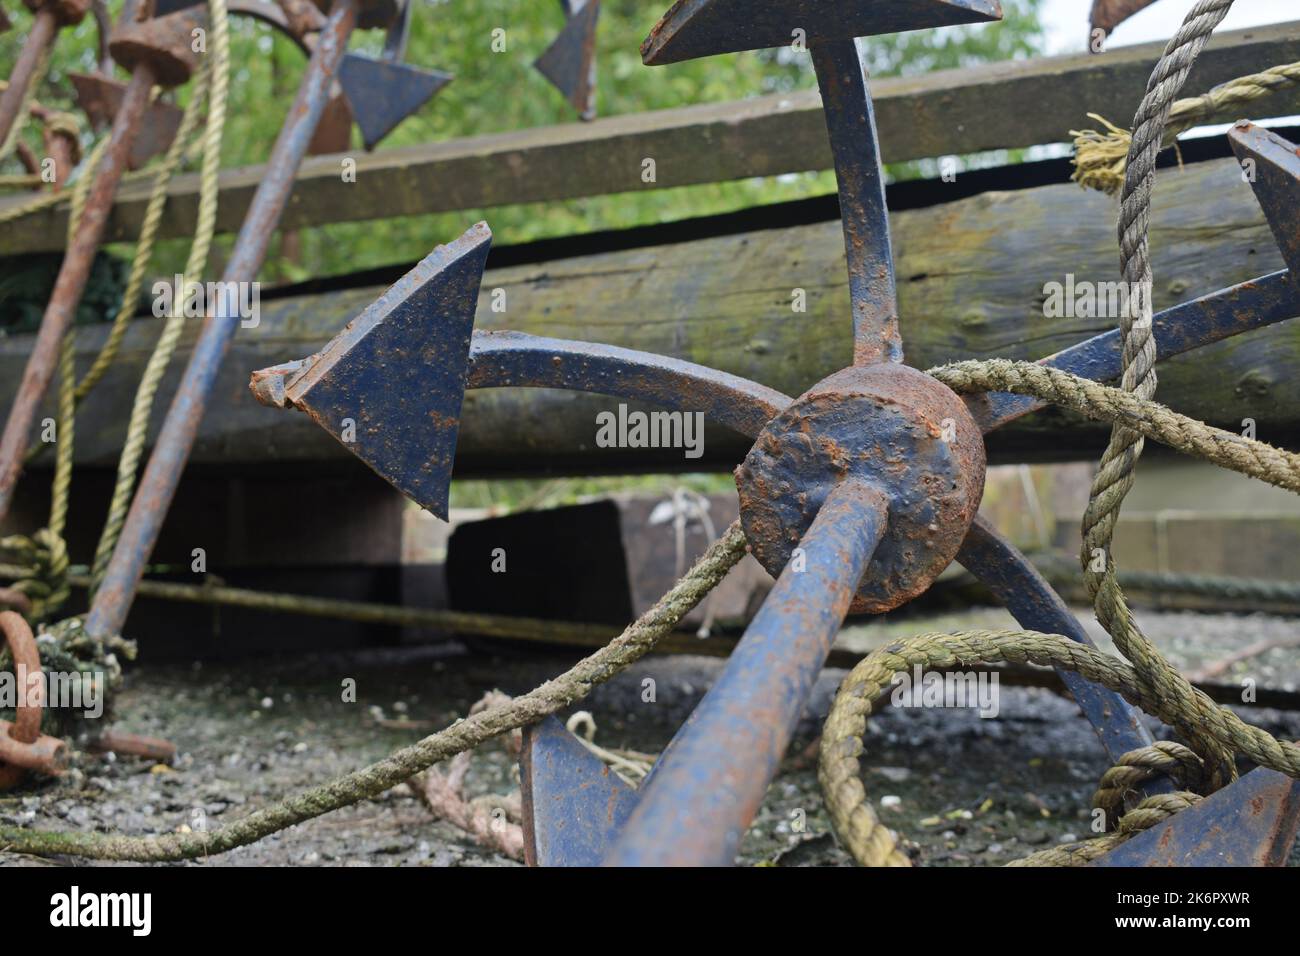 Rusty Anchors and Maritime Equipment on a Wooden Dock at Daytime Stock Photo